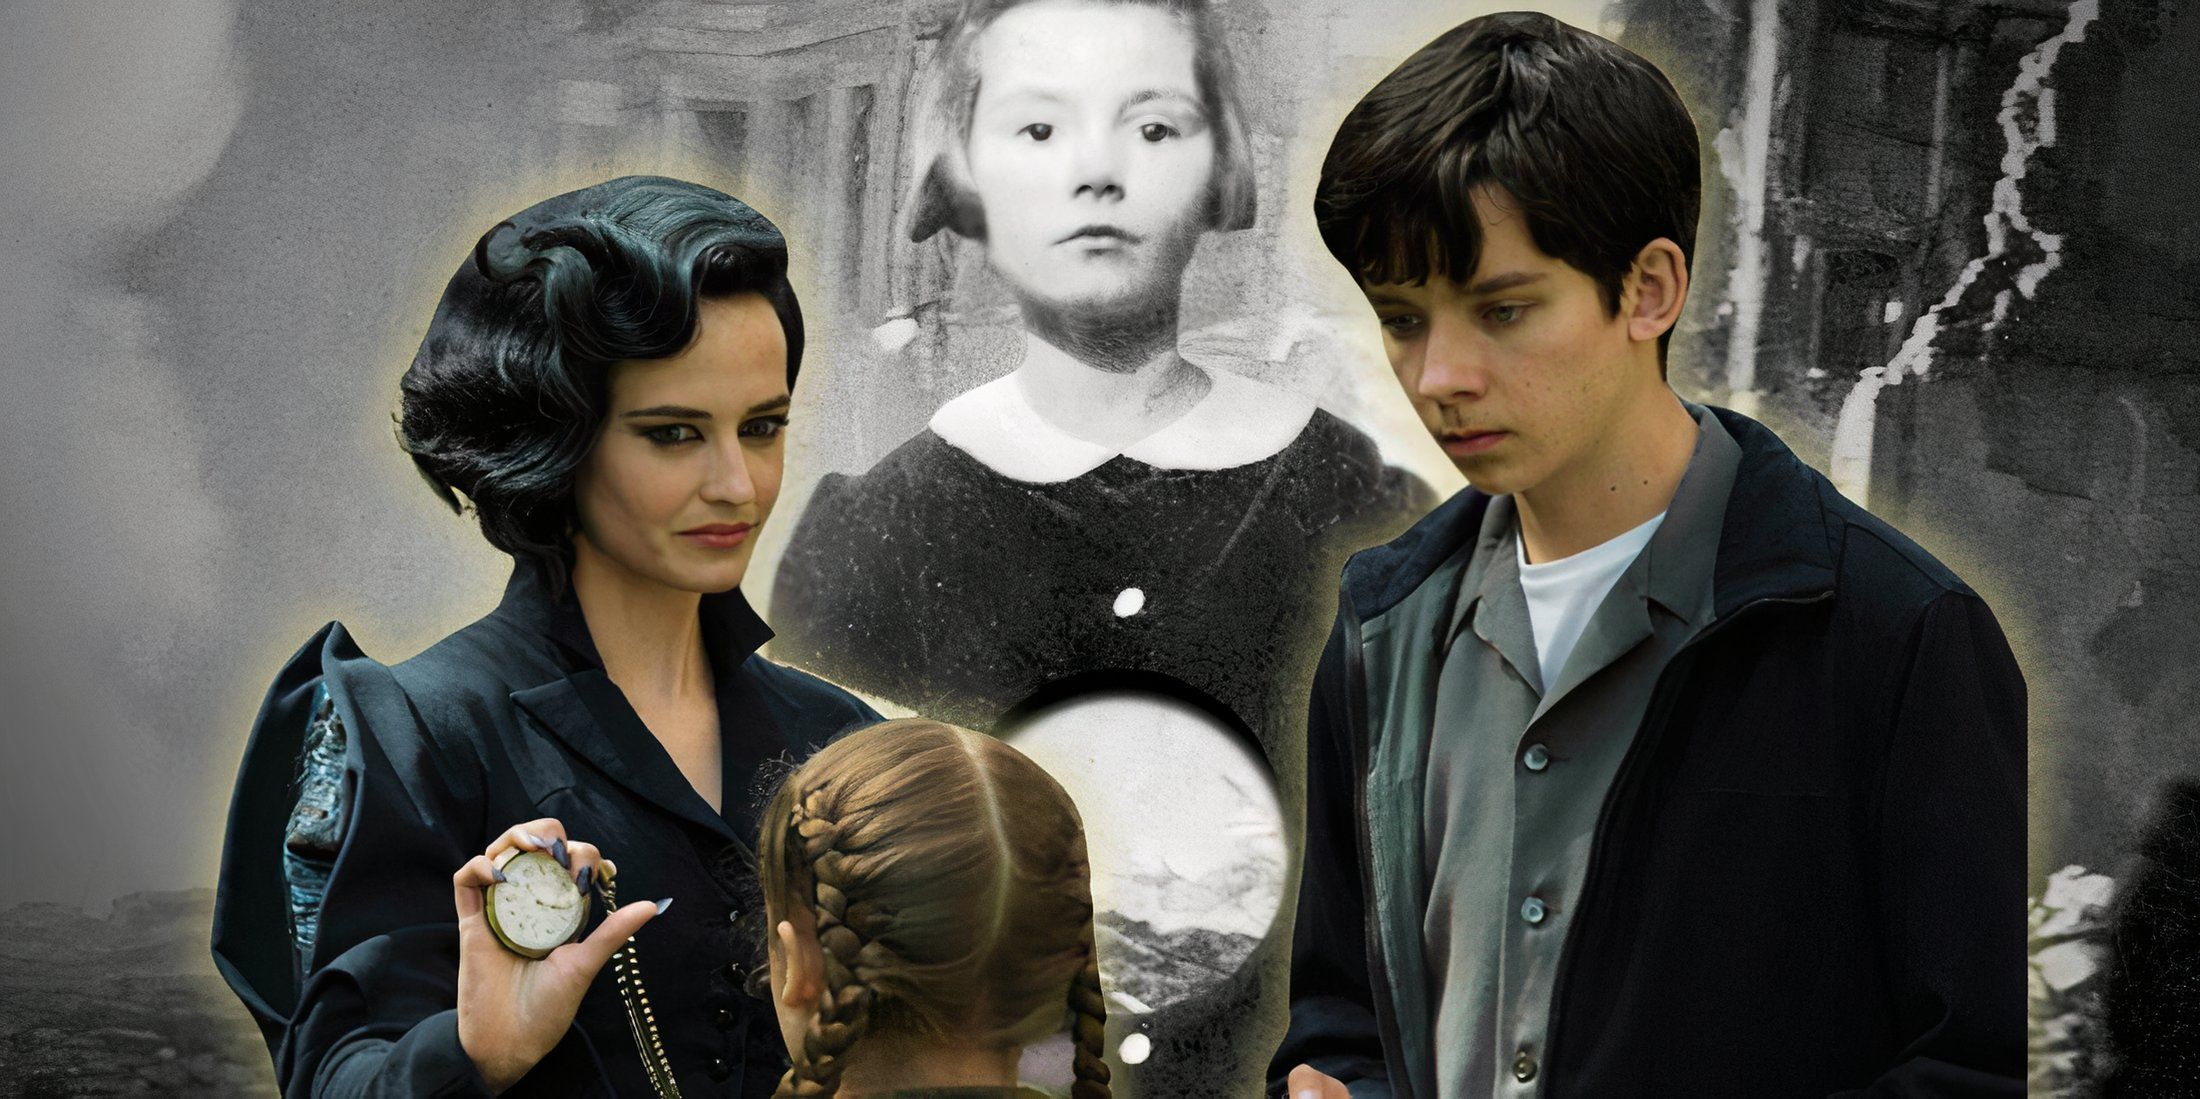 Eva Green and Asa Butterfield in Miss Peregrine's Home For Peculiar Children over an image of the book cover for Hollow City